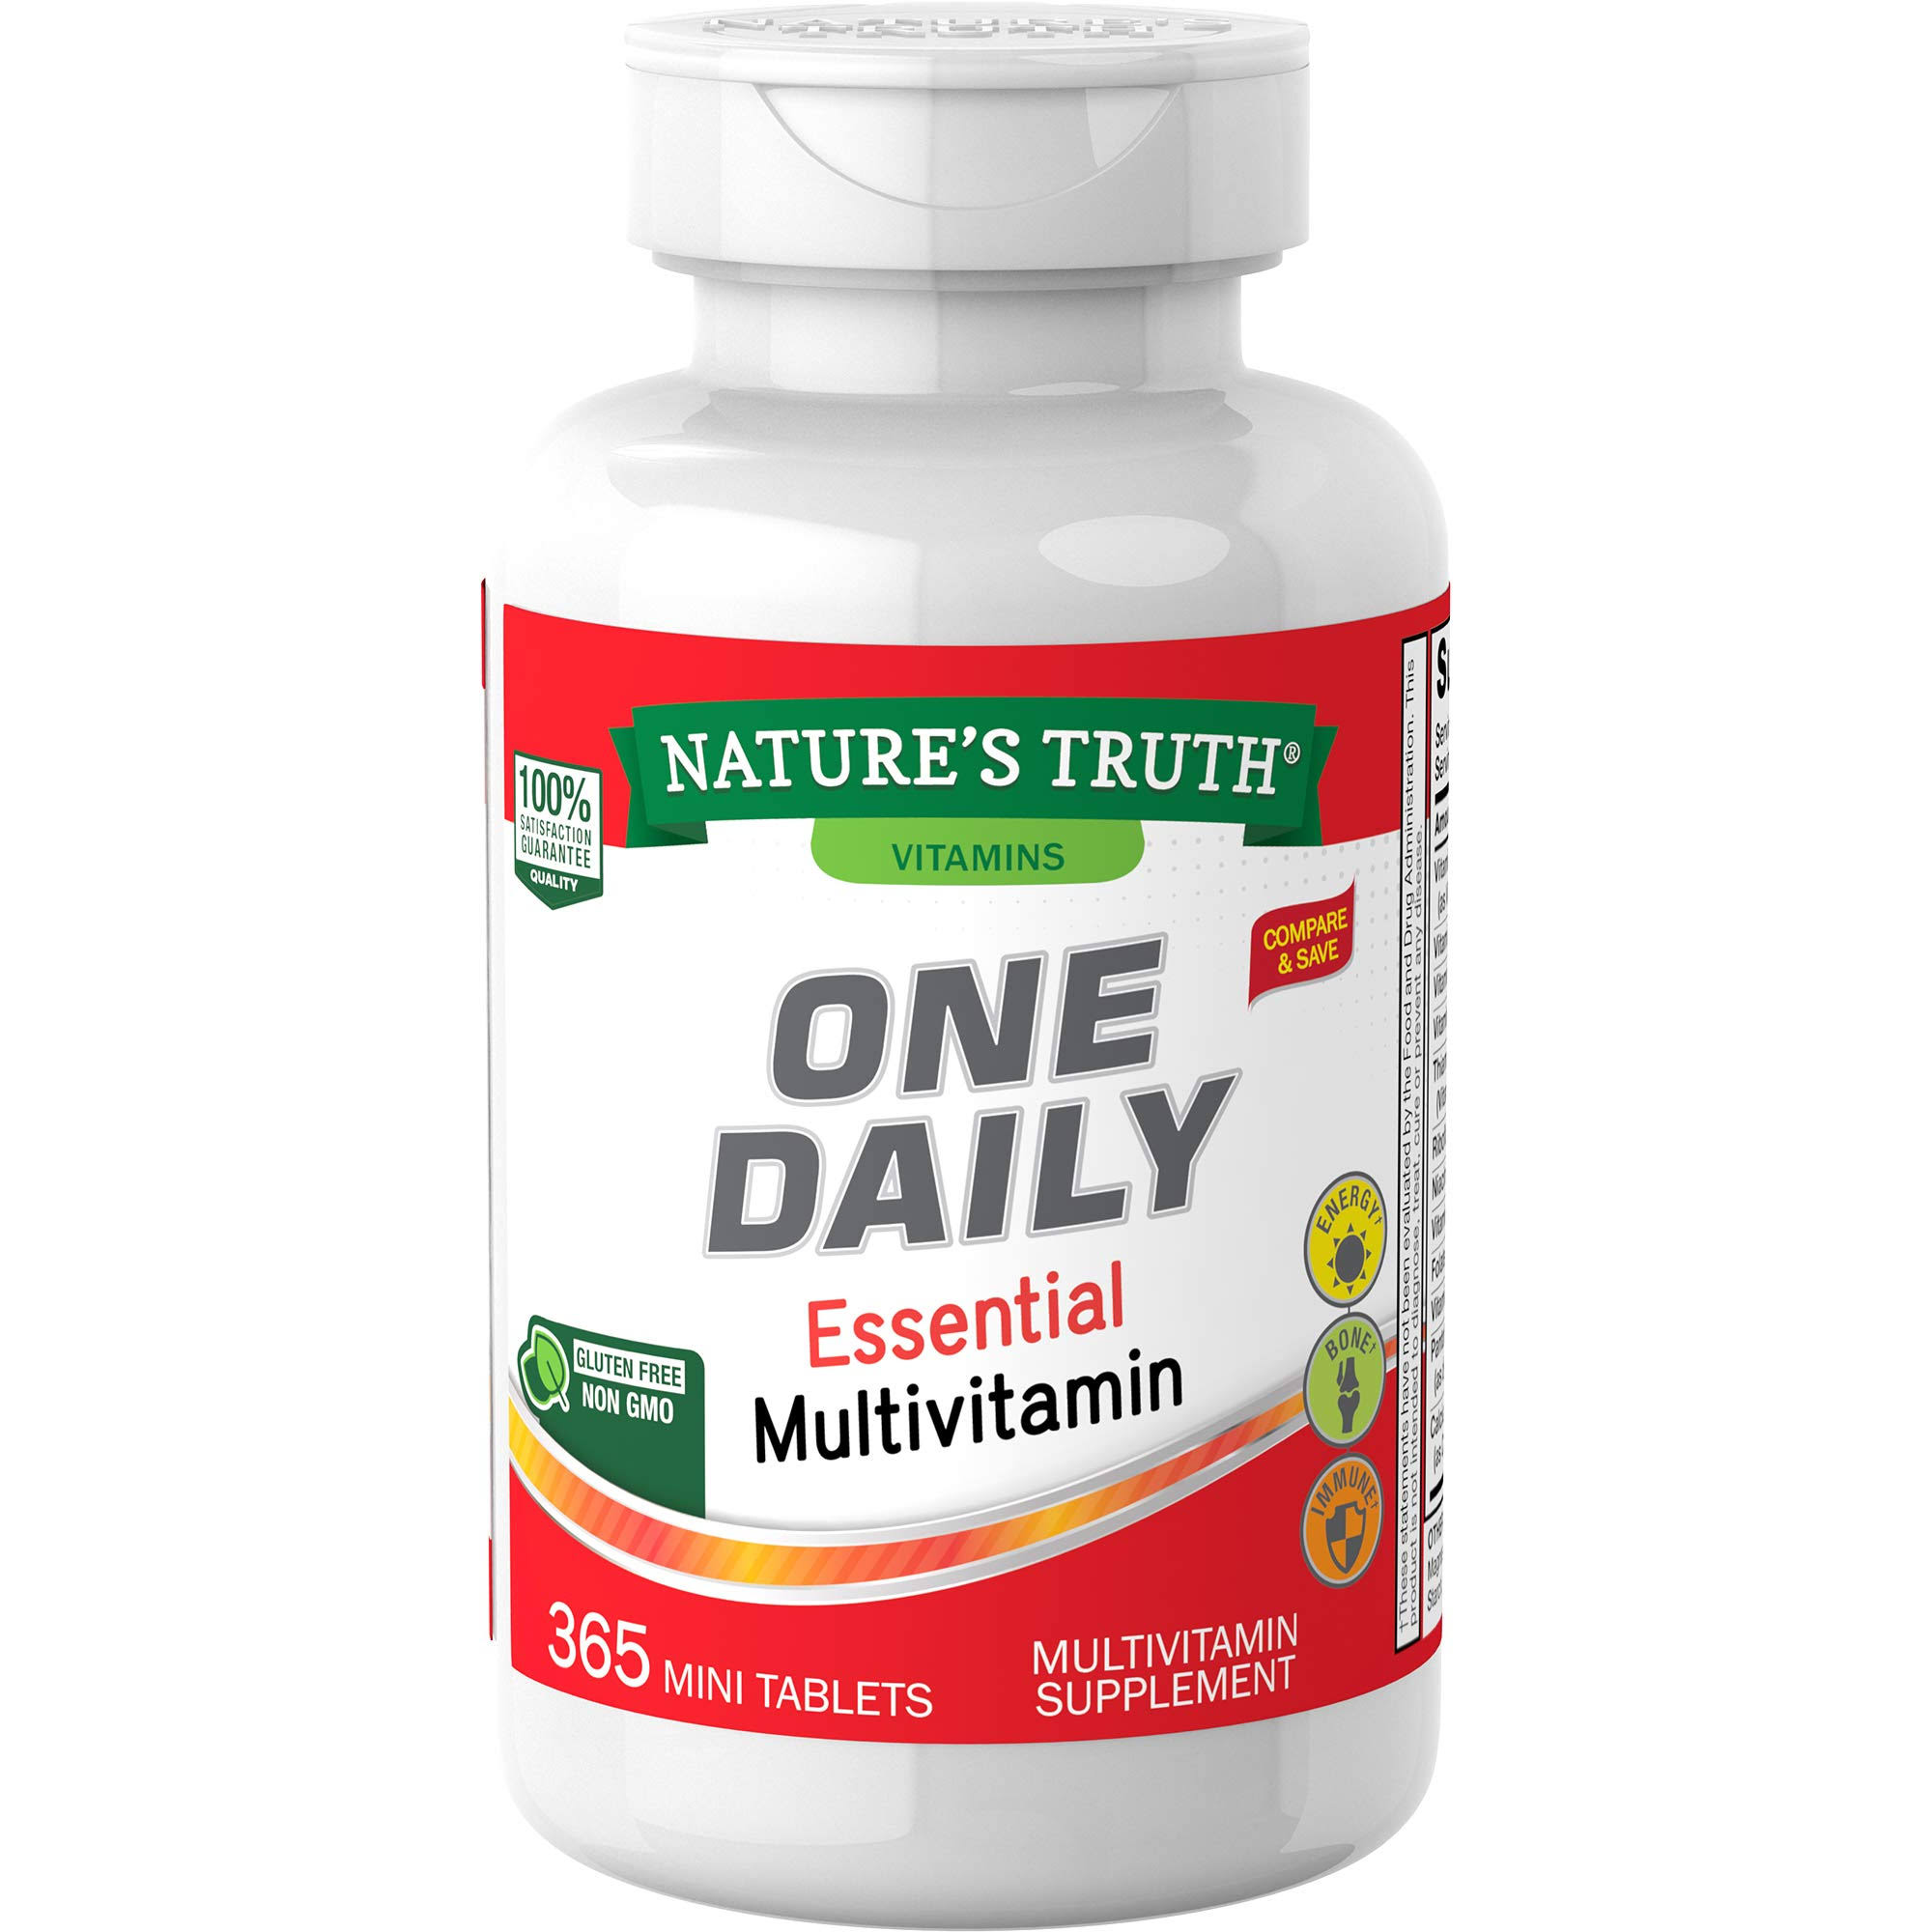 Nature's Truth One Daily Essential Multivitamin Tablets, 365 Count